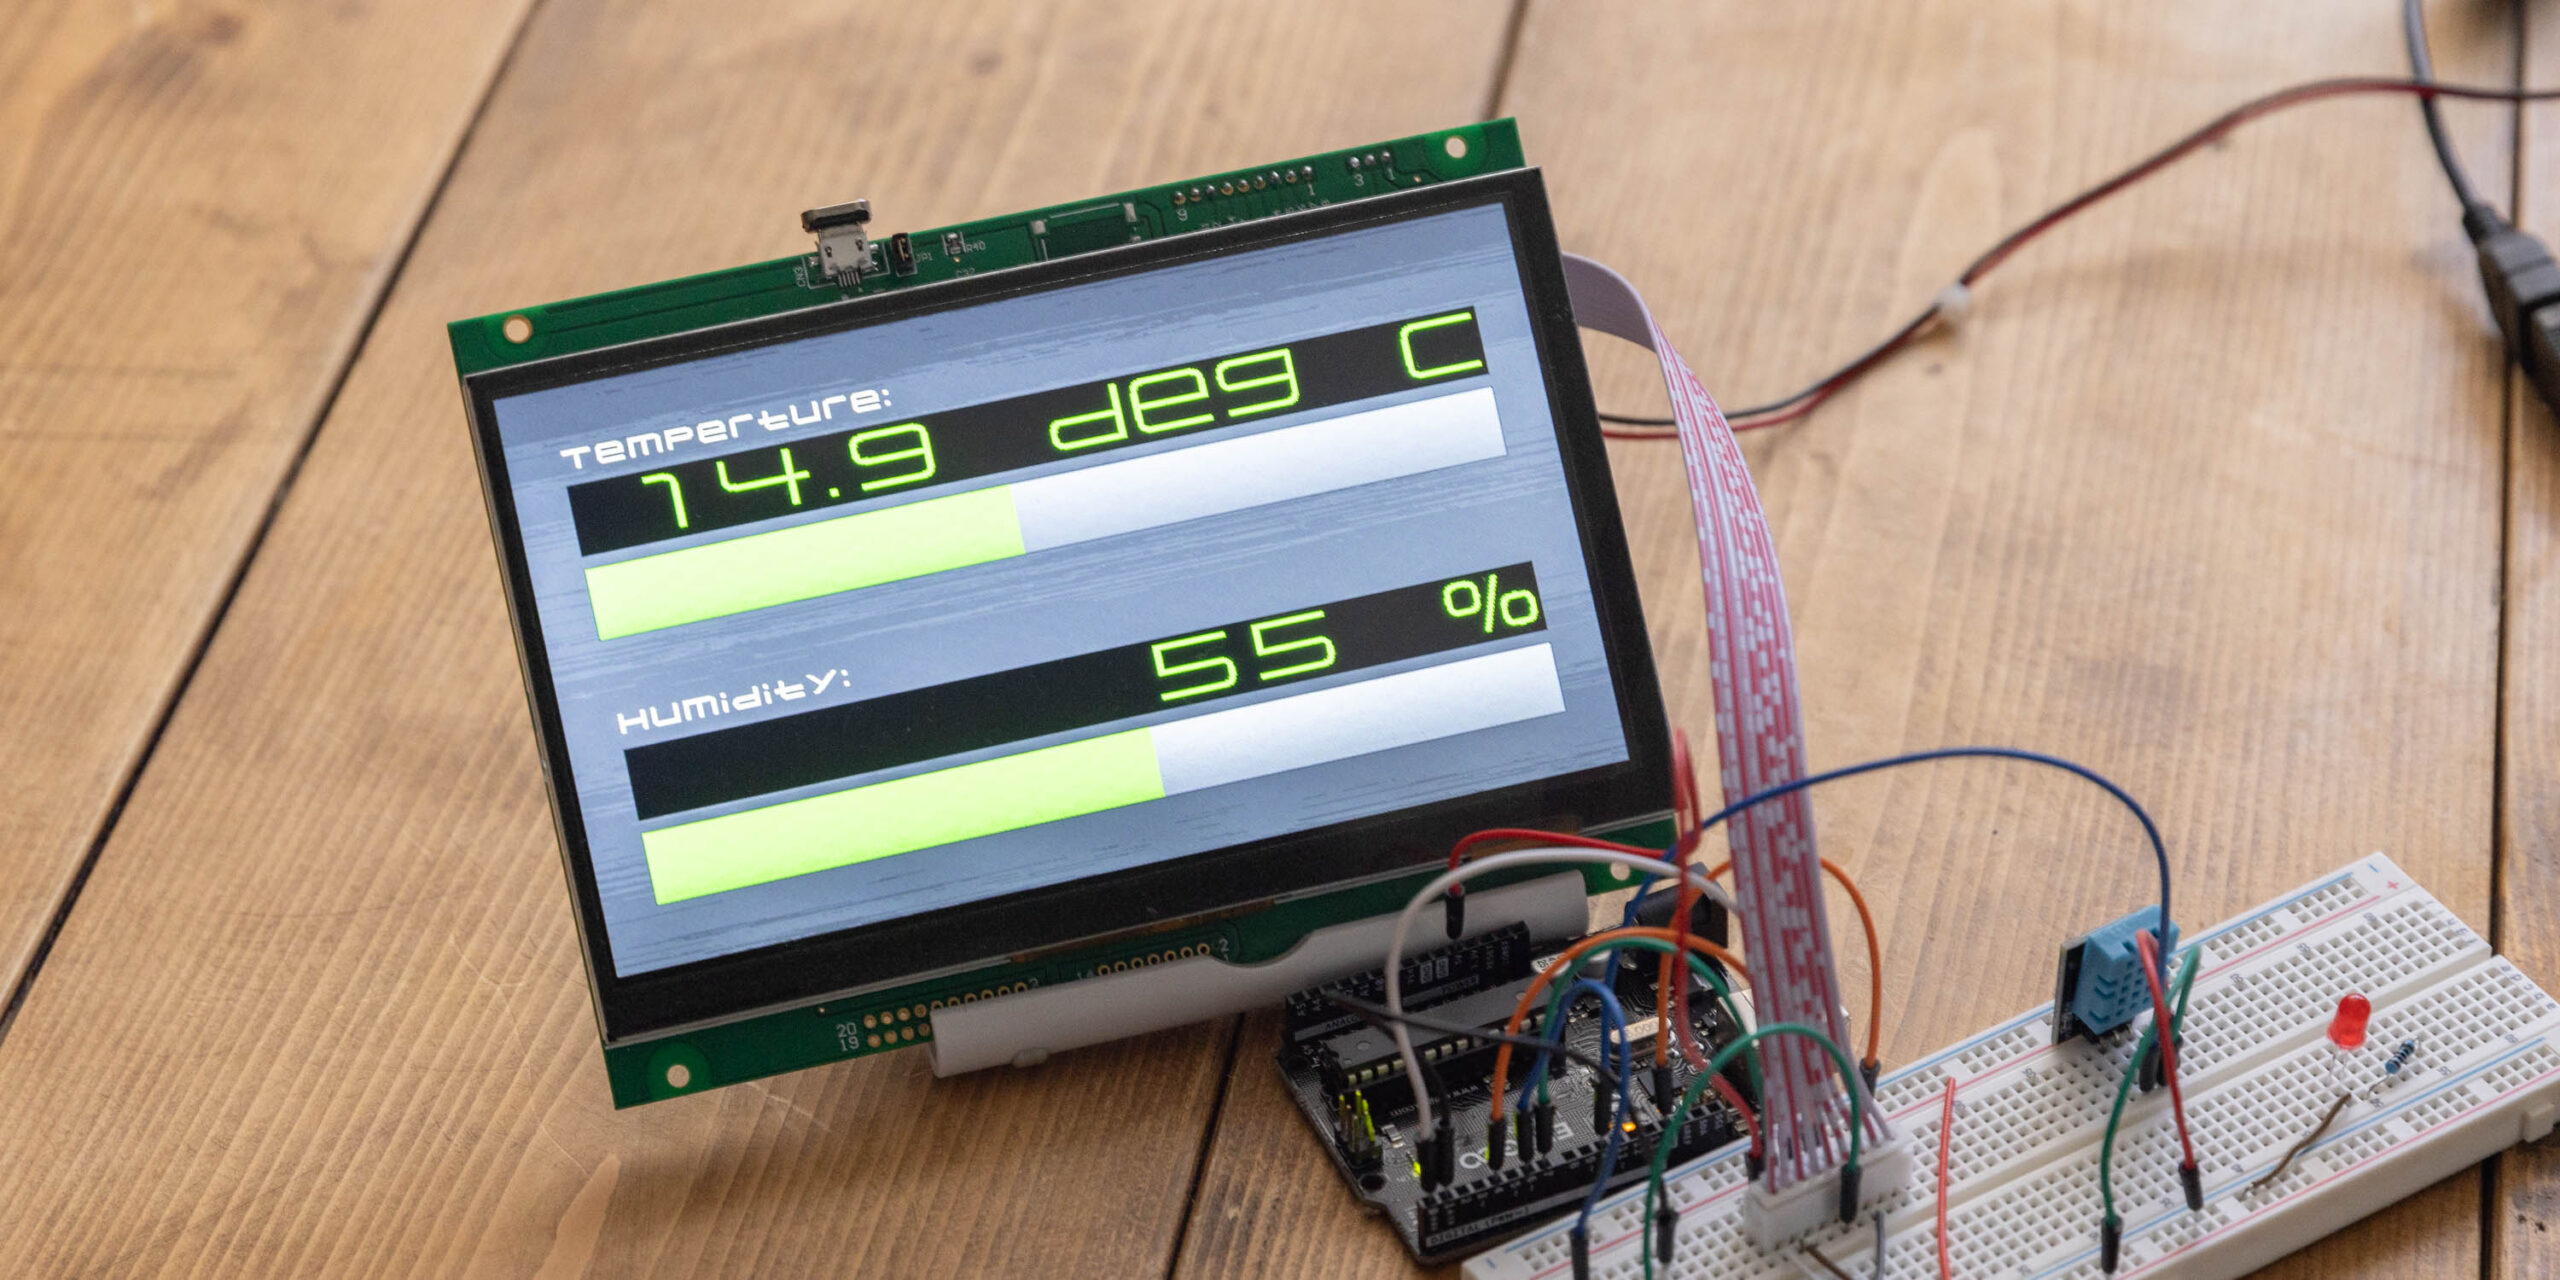 Display values obtained from Arduino in a highly visible design